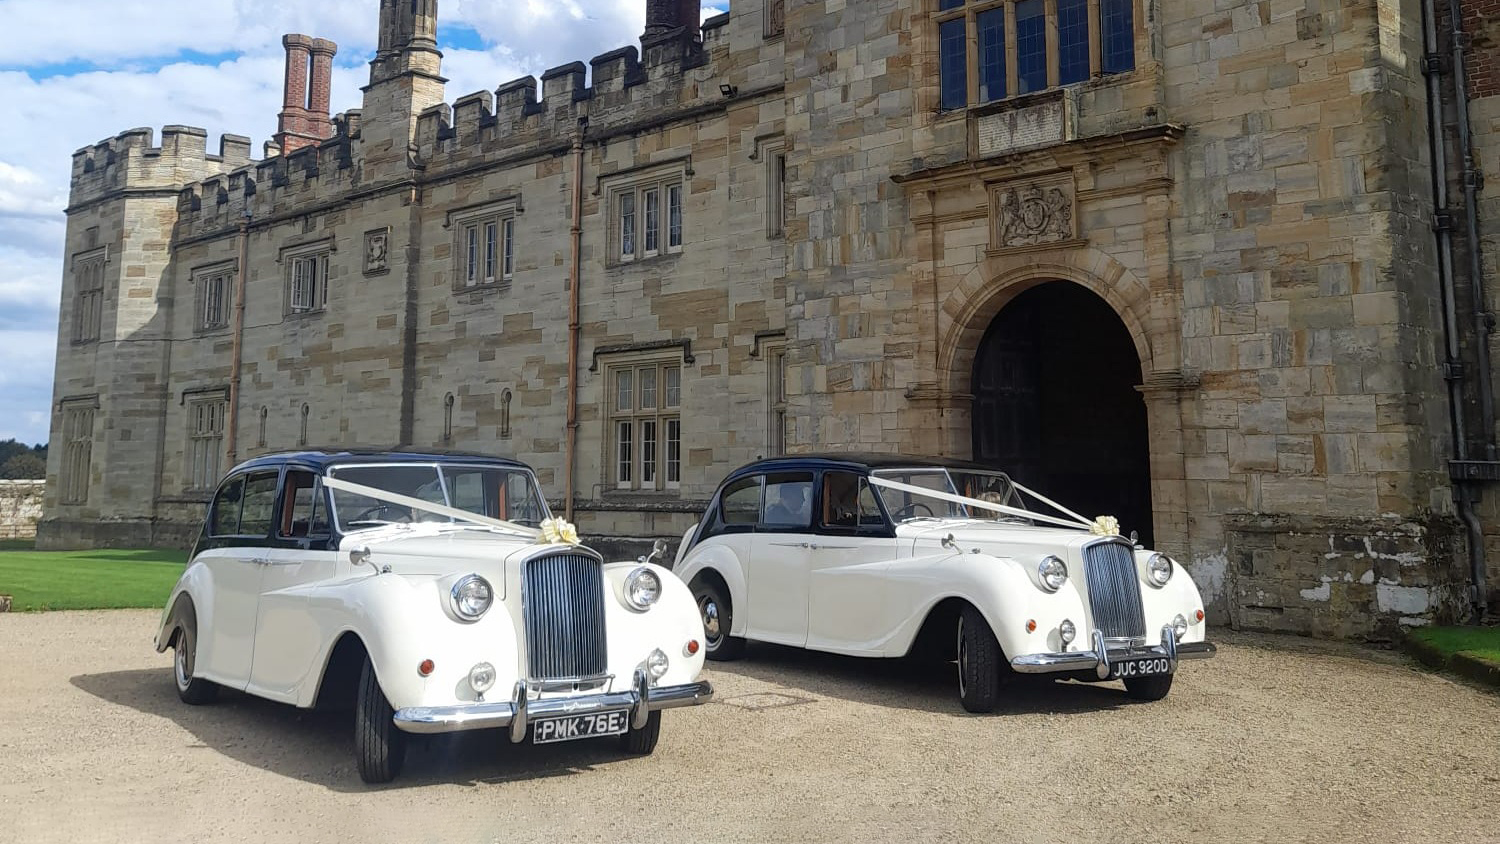 Two Classic Austin Princess Limousine decorated with Ivory Ribbons and Bows on top of the front grill. Vehicles are parked in front of a large manor house in Faversham